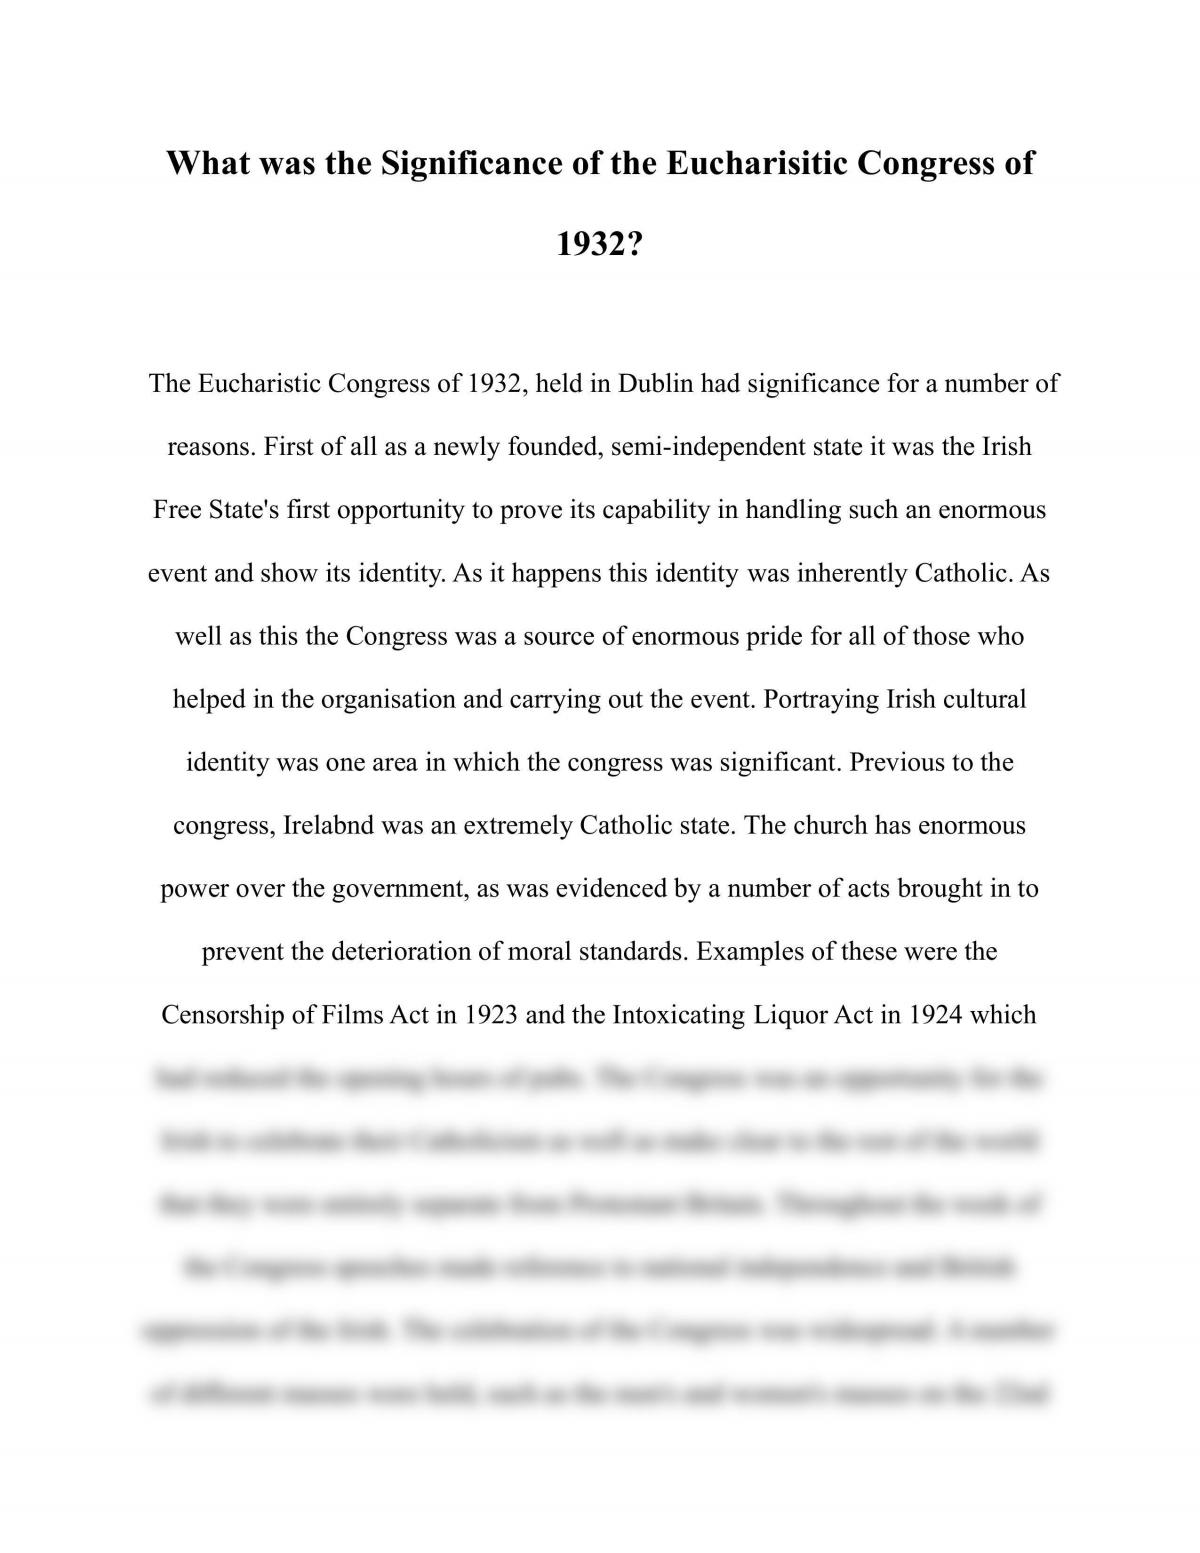 What was the Significance of the Eucharisitic Congress of 1932? - Page 1